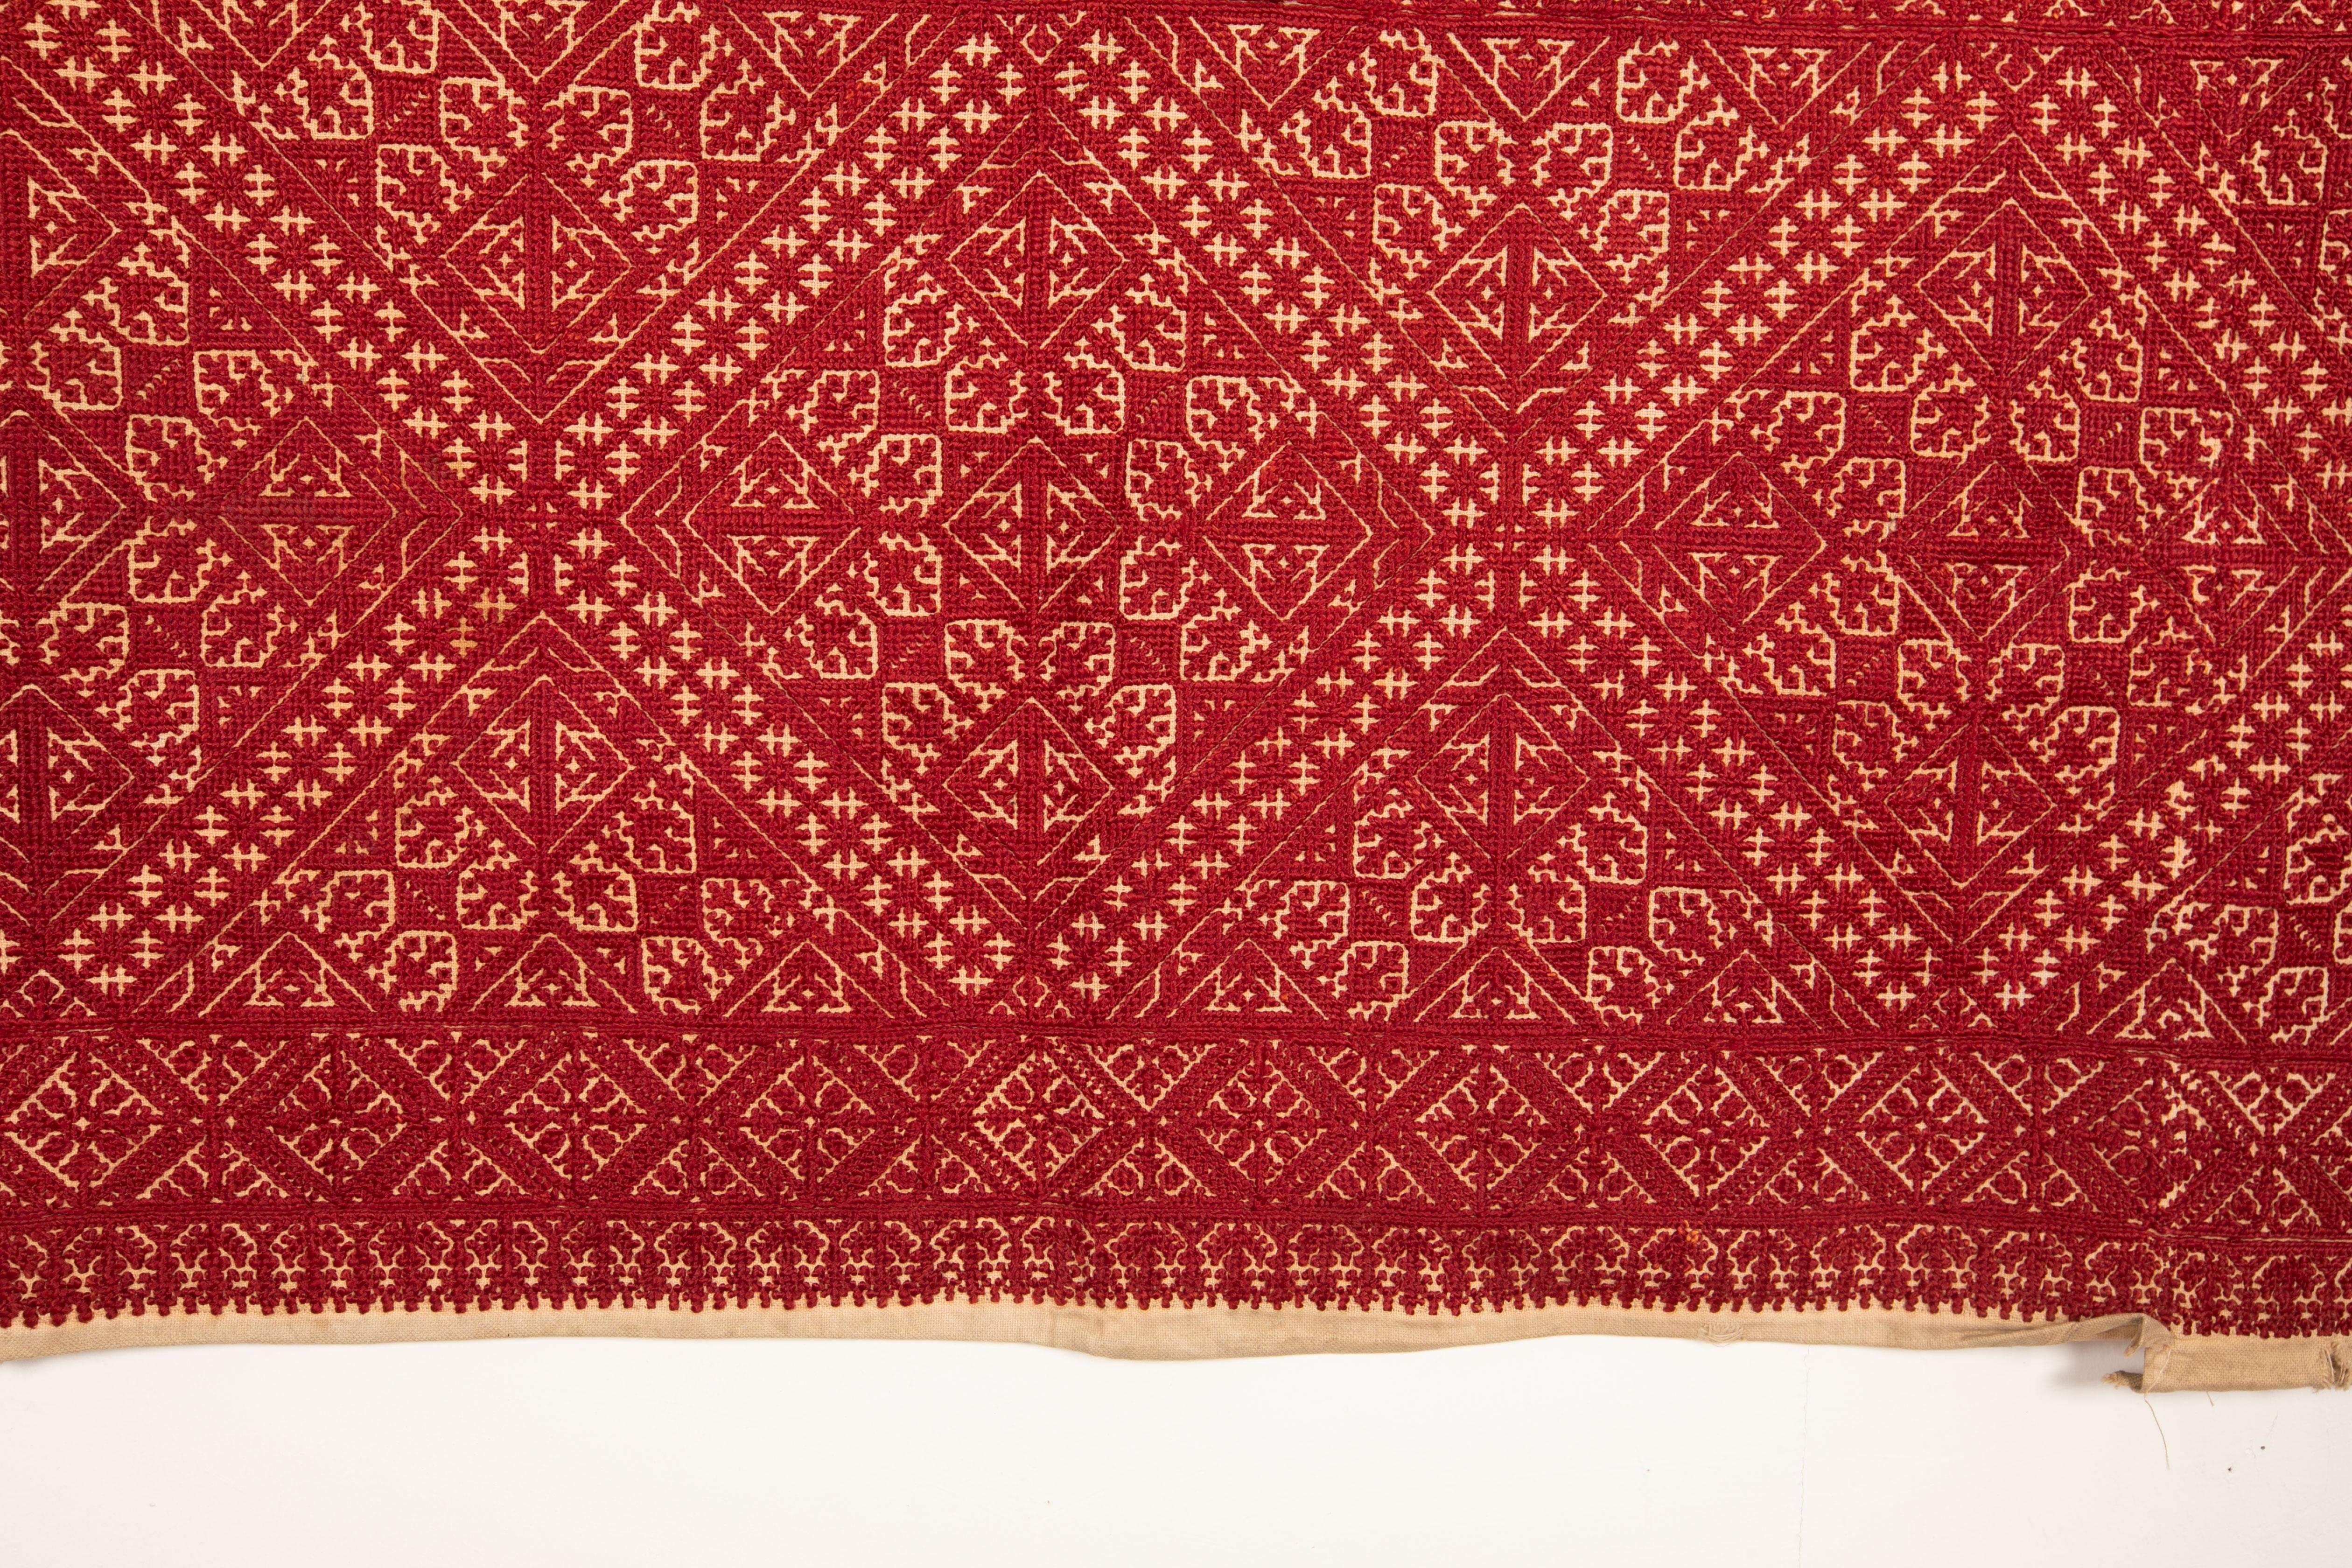 Embroidered Antique Fez Embroidery from Morocco, 1900s